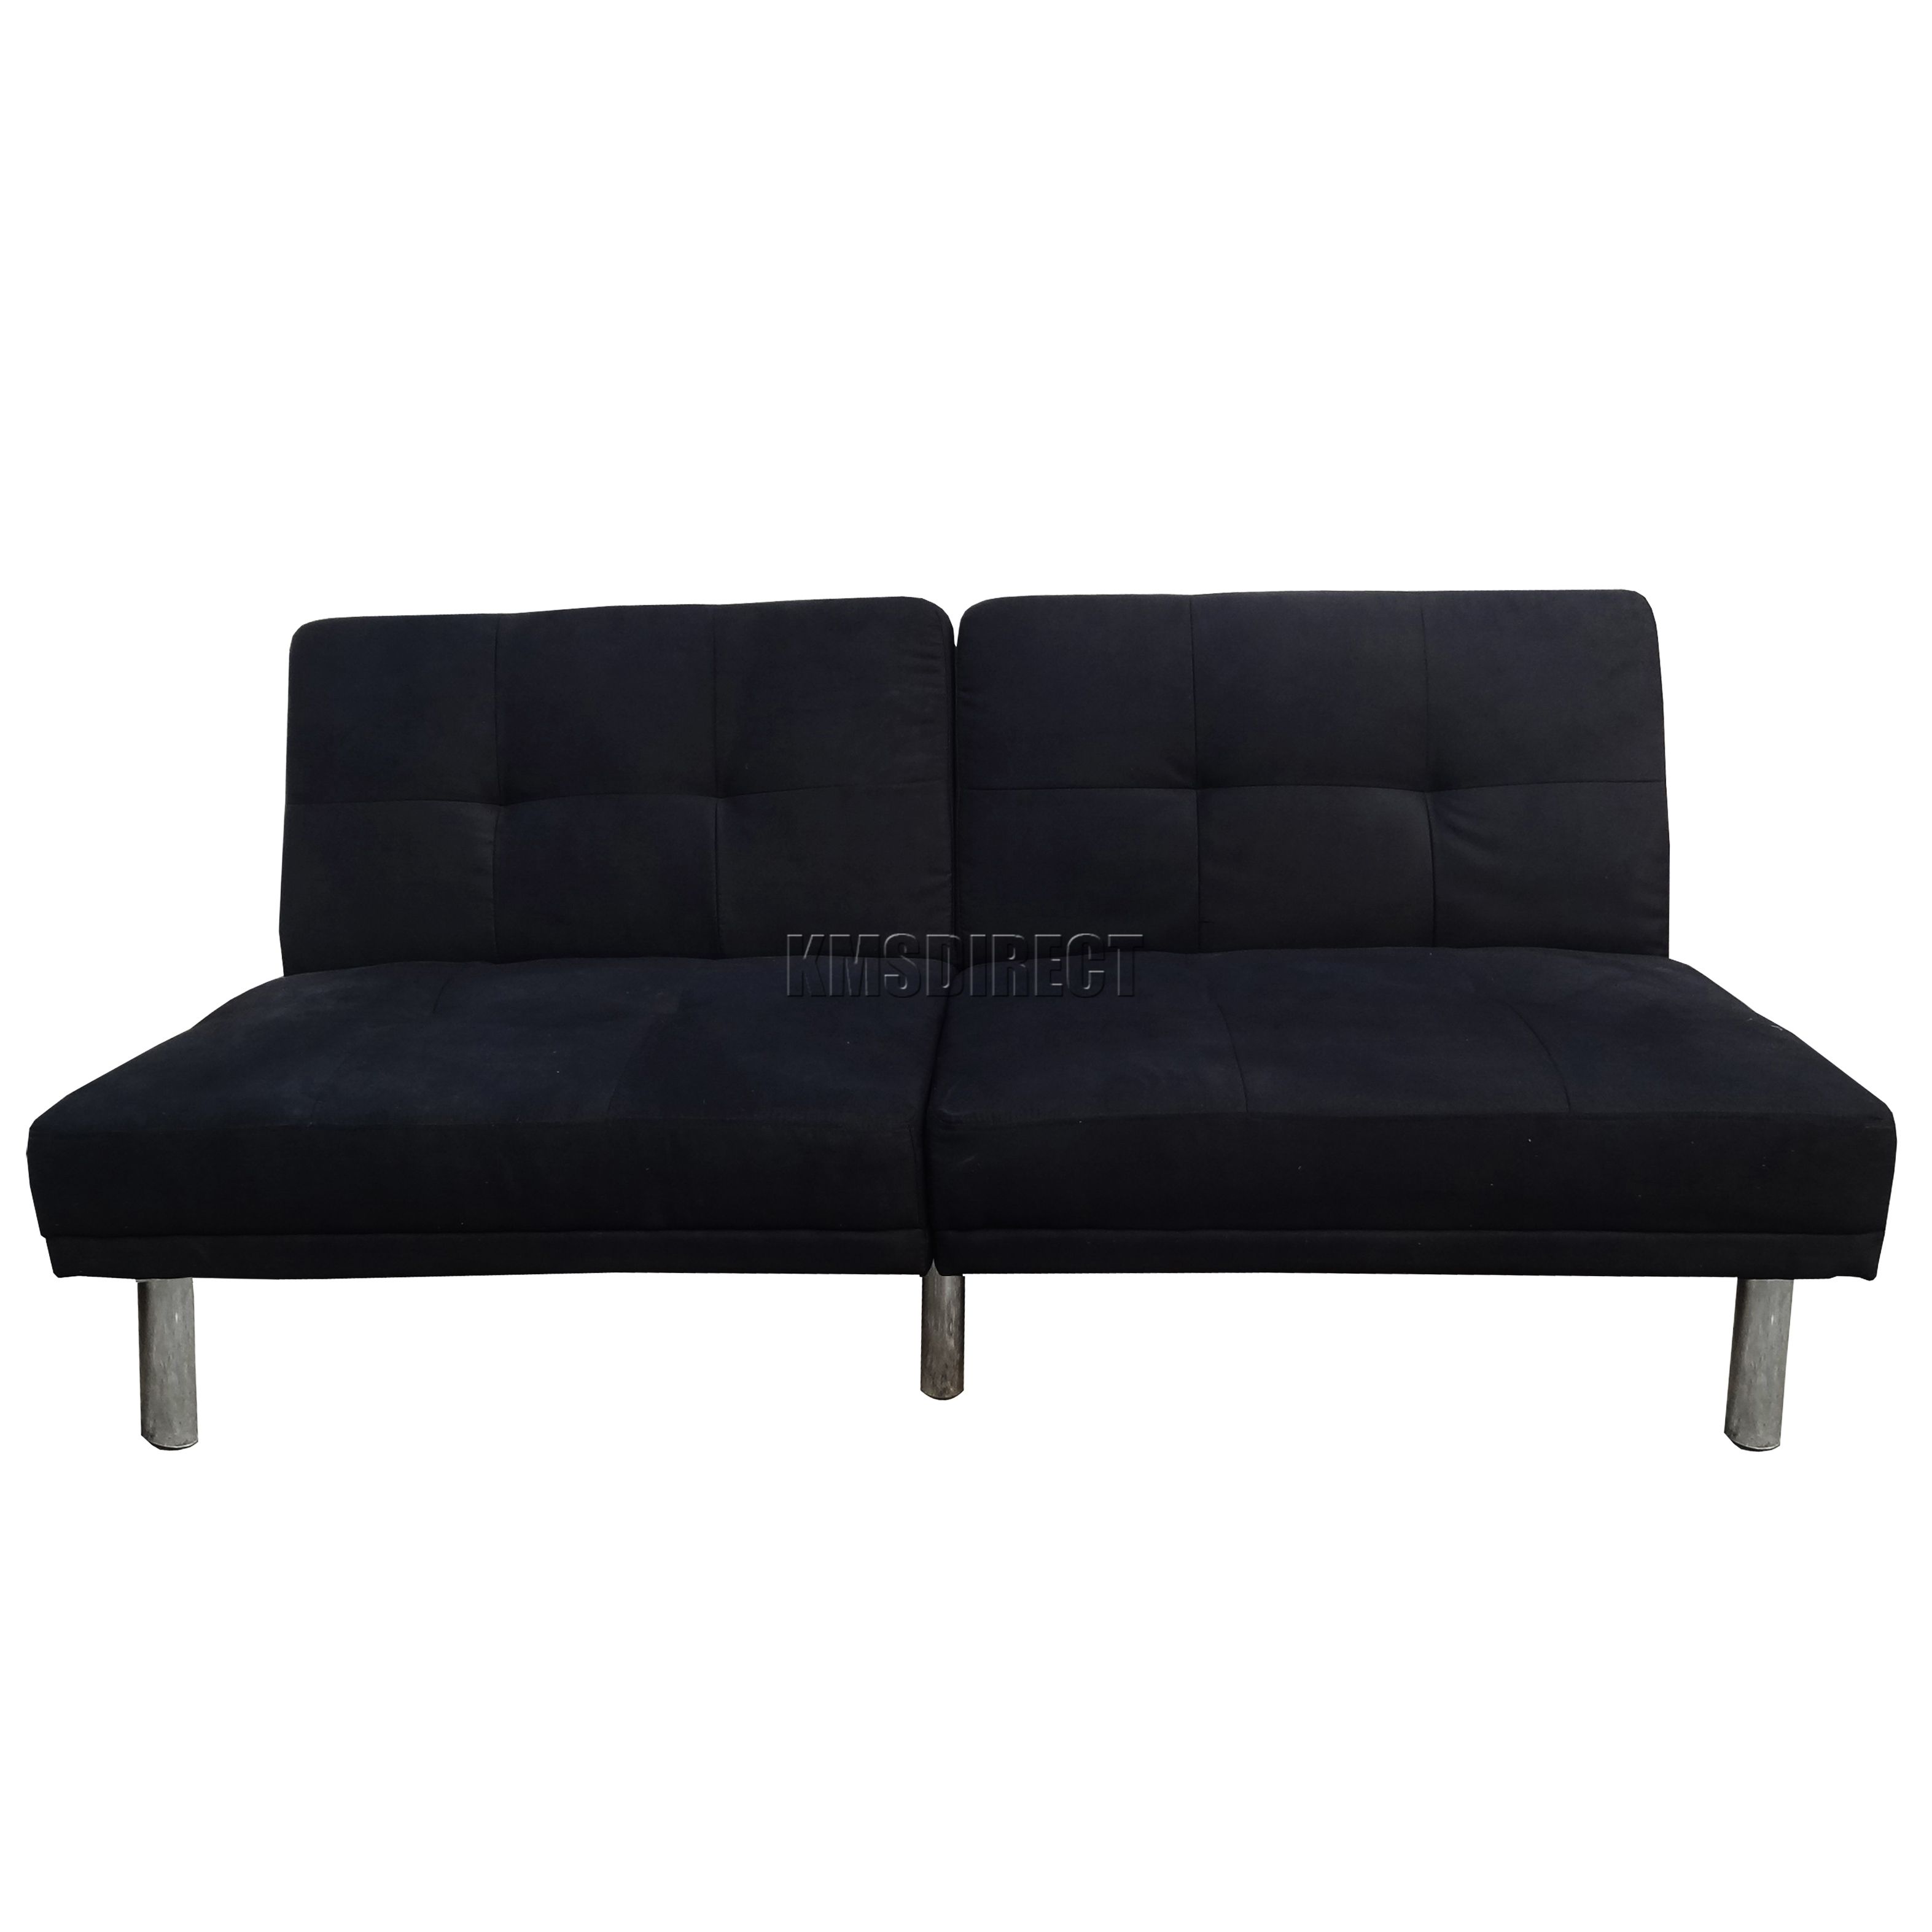 Foxhunter Fabric Faux Suede Sofa Bed Recliner 2 Seater Living Room For Faux Suede Sofas (View 4 of 10)